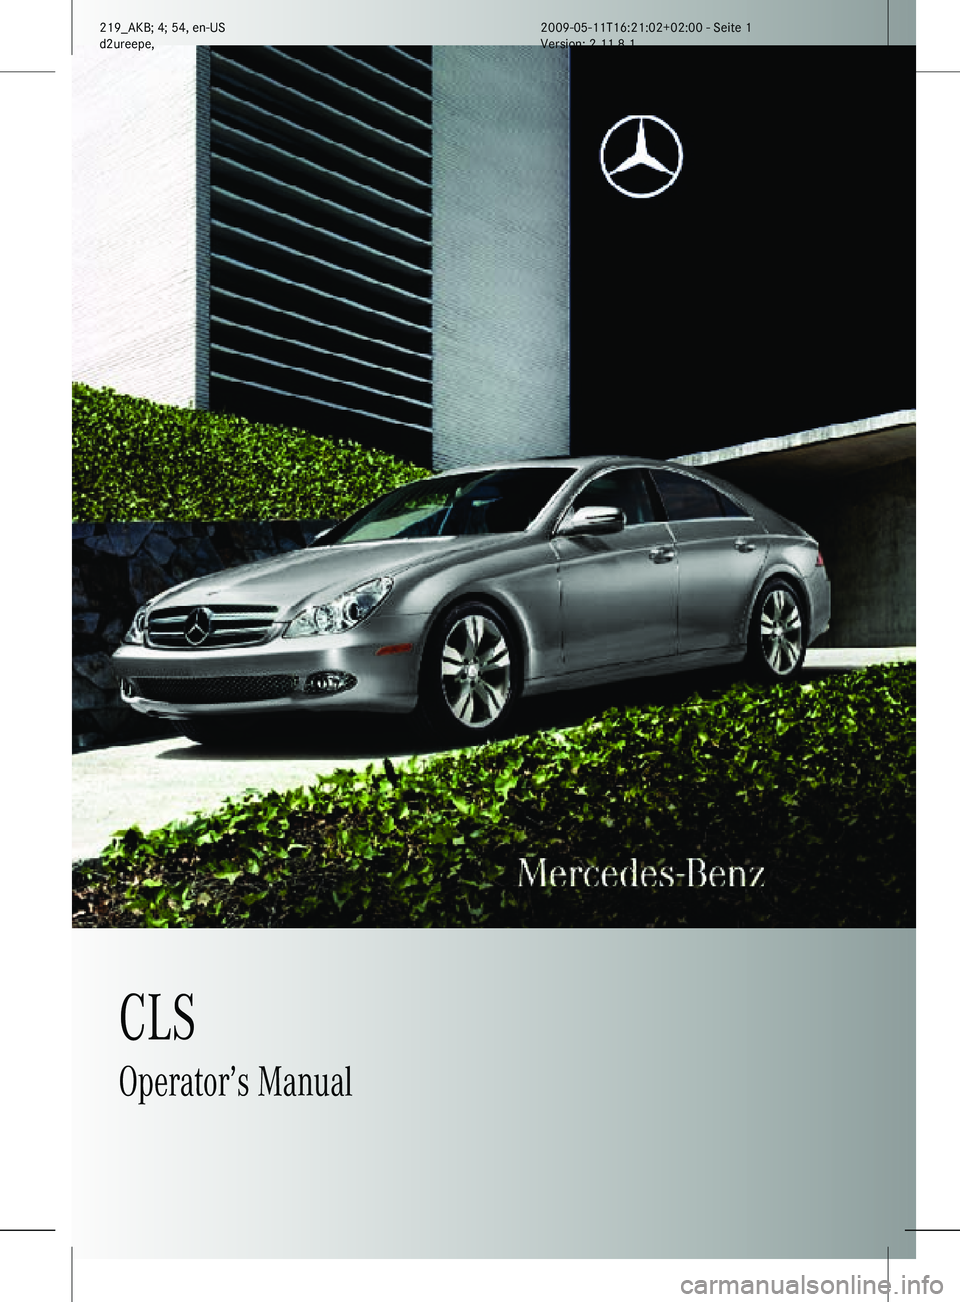 MERCEDES-BENZ CLS 2010  Owners Manual CLS
Operator’s Manual
219_AKB; 4; 54, en-US
d2ureepe,Version: 2.11.8.1 2009-05-11T16:21:02+02:00 - Seite 1    